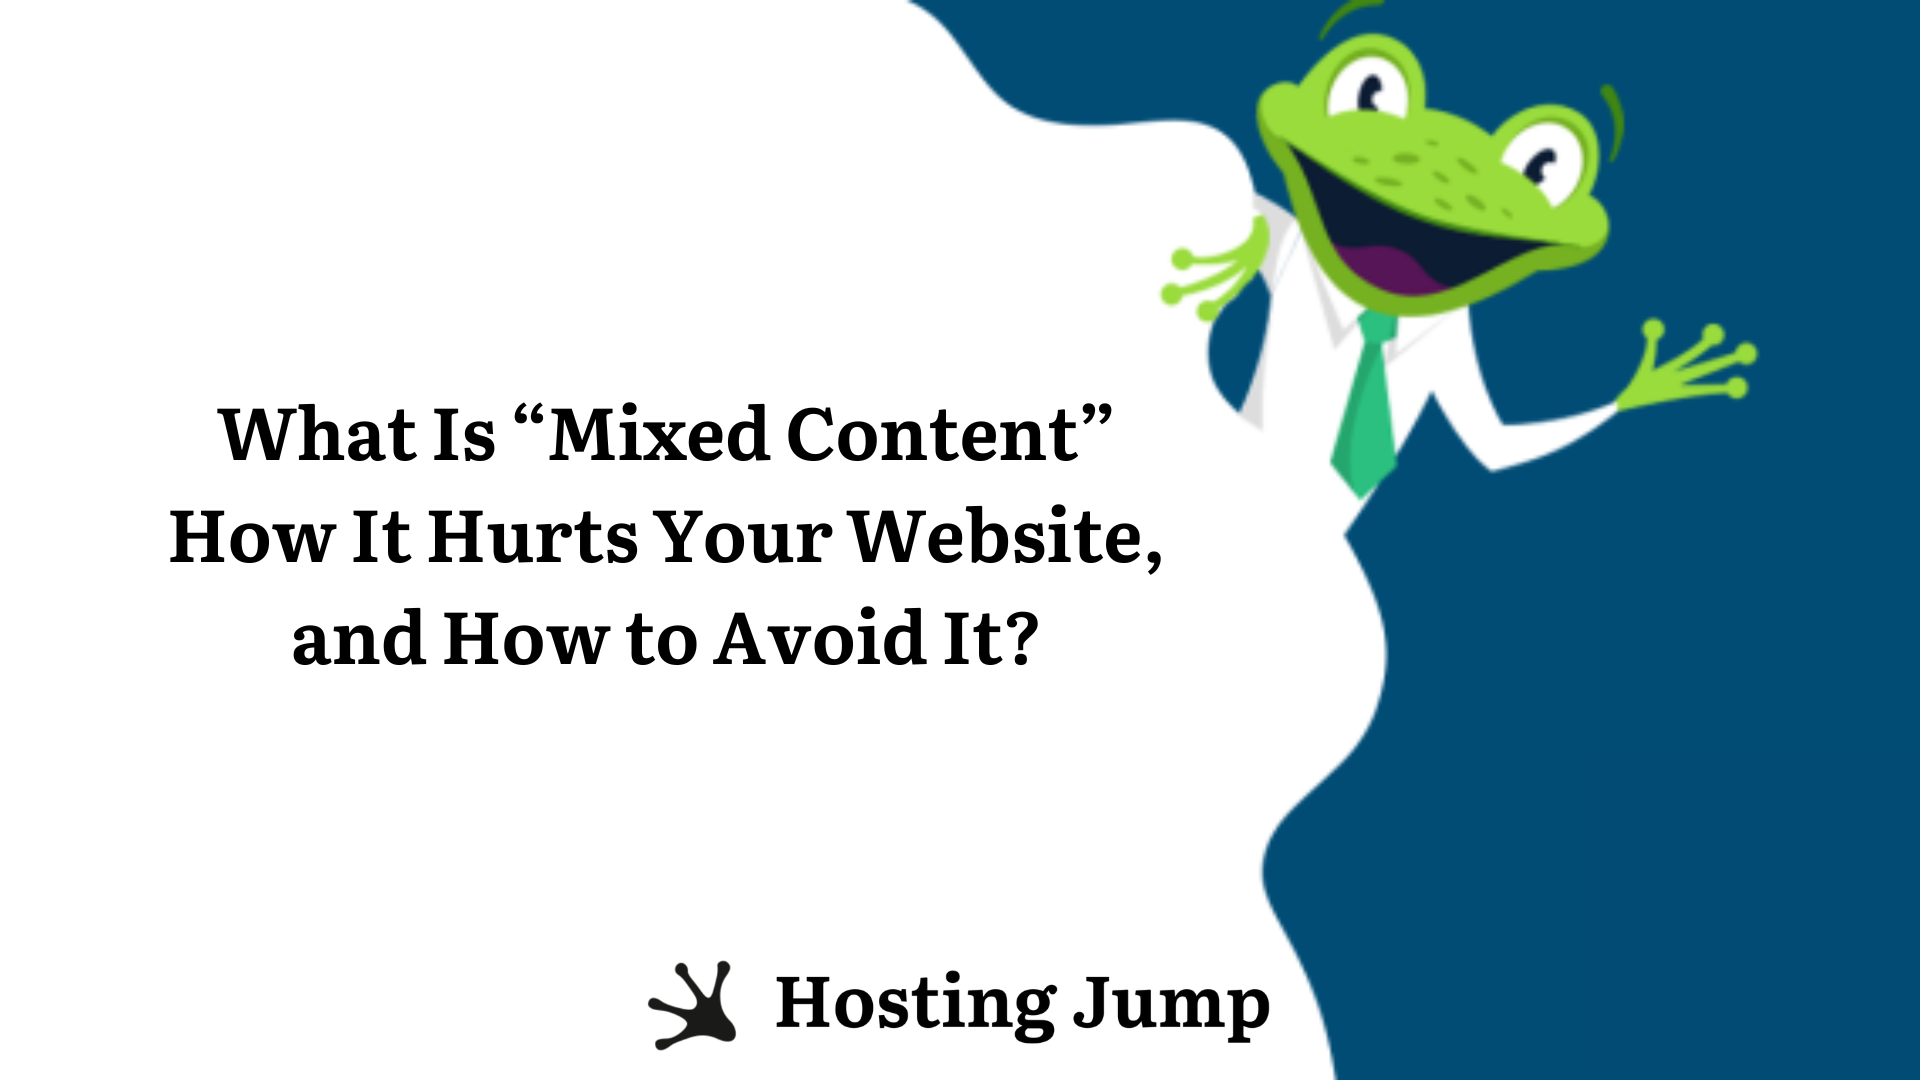 What Is “Mixed Content”, How It Hurts Your Website, and How to Avoid It?